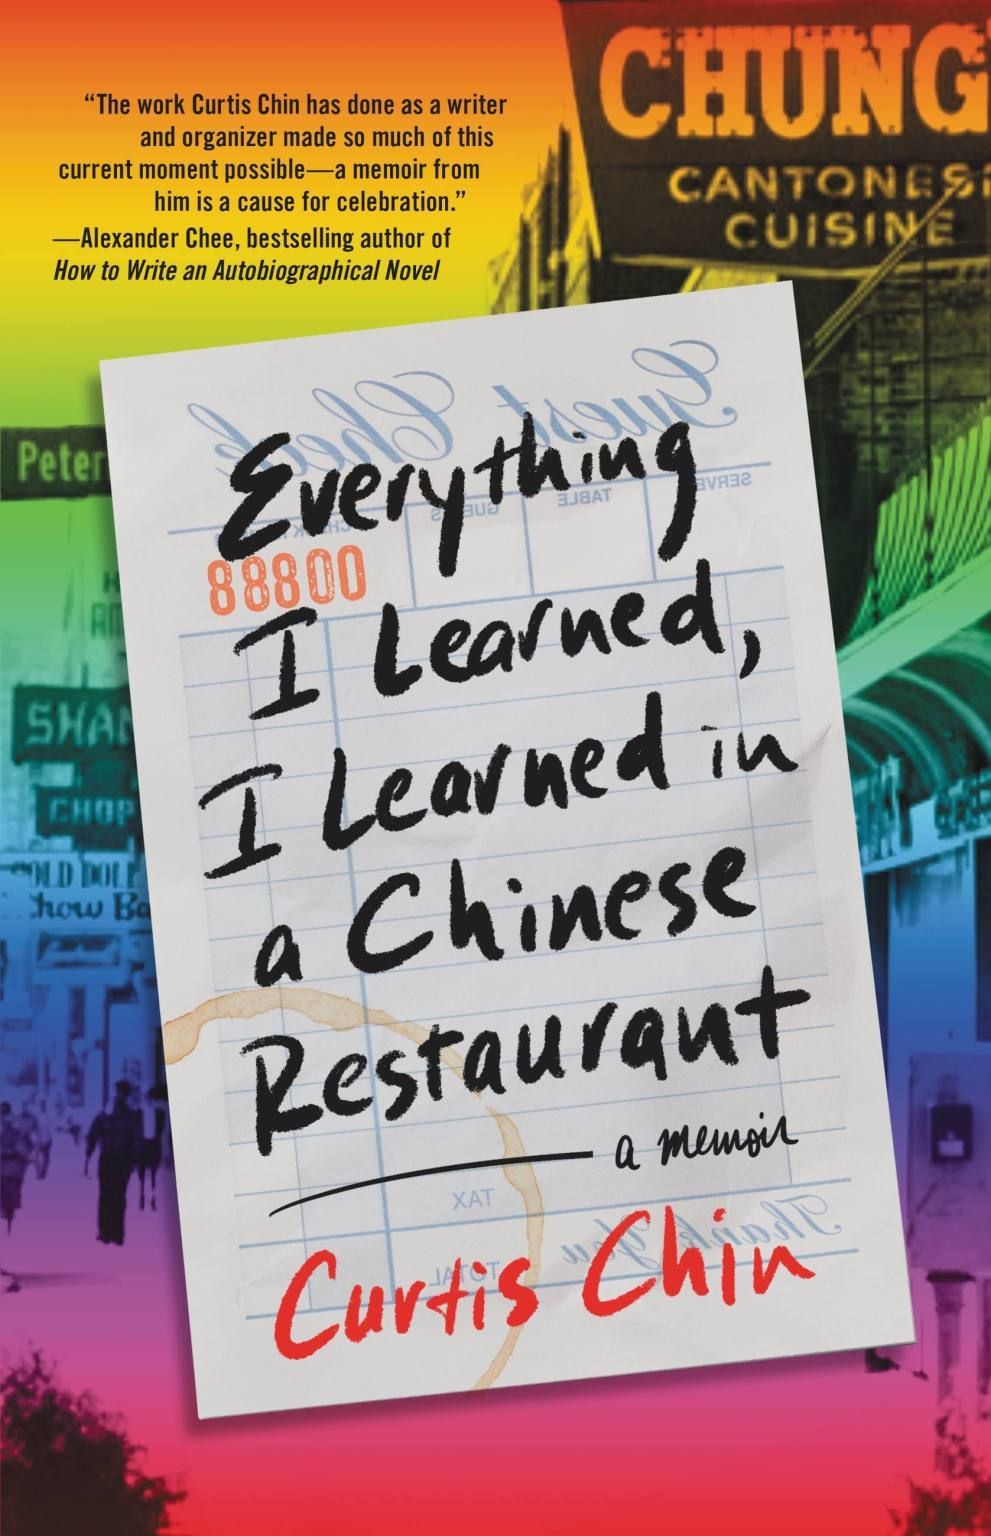 The Gift That Chung’s Gave Me: On Curtis Chin’s “Everything I Learned, I Learned in a Chinese Restaurant”